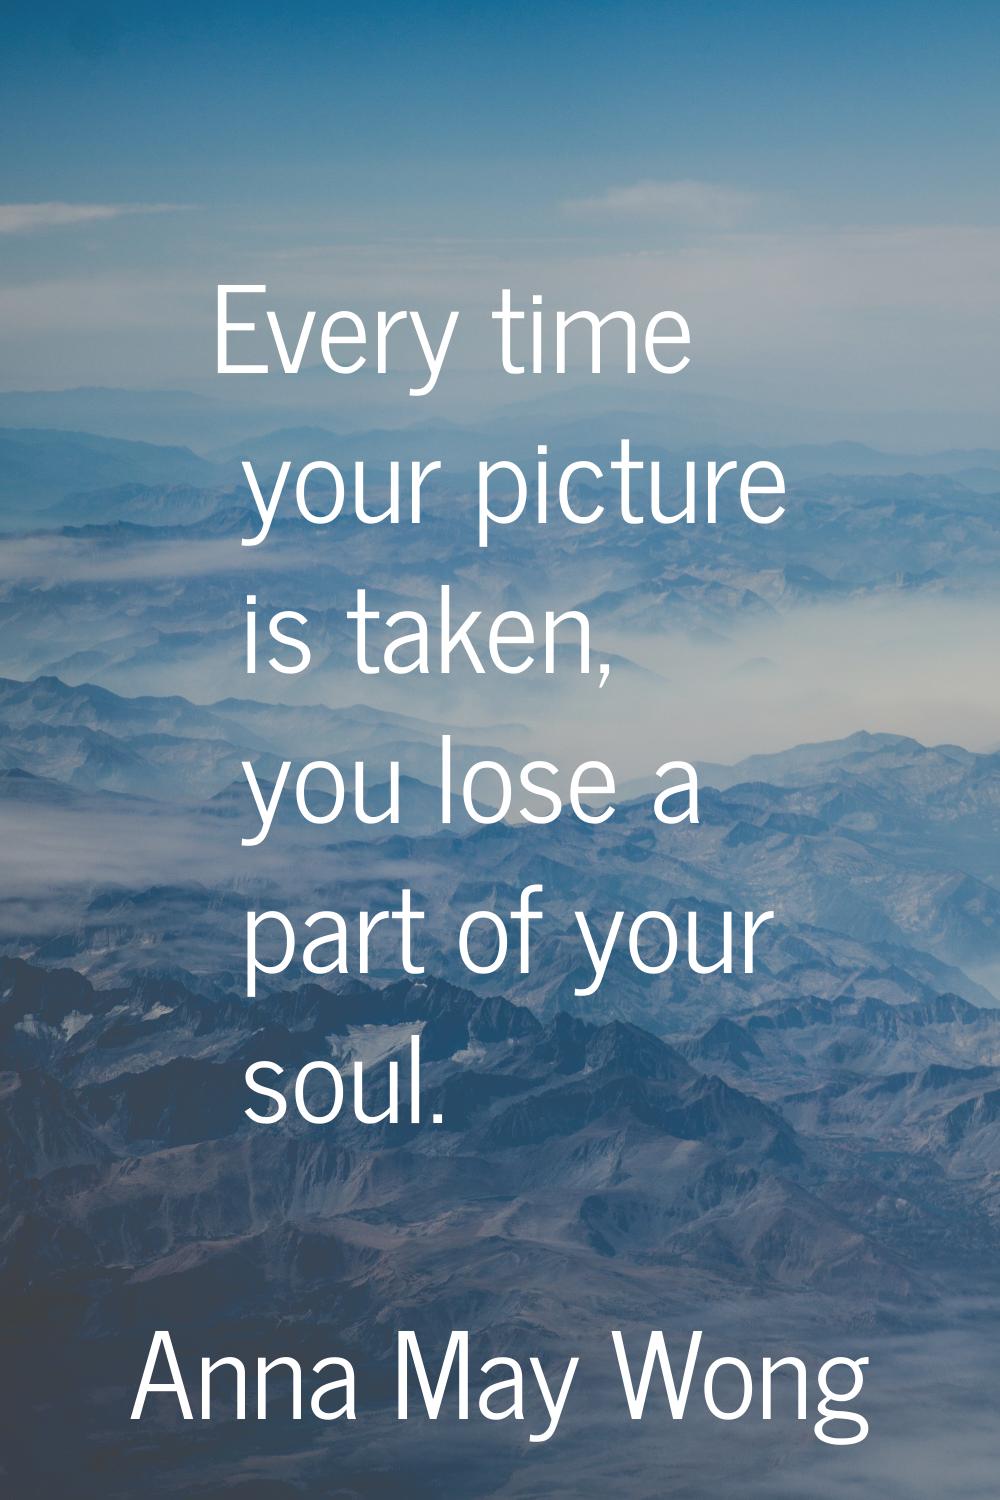 Every time your picture is taken, you lose a part of your soul.